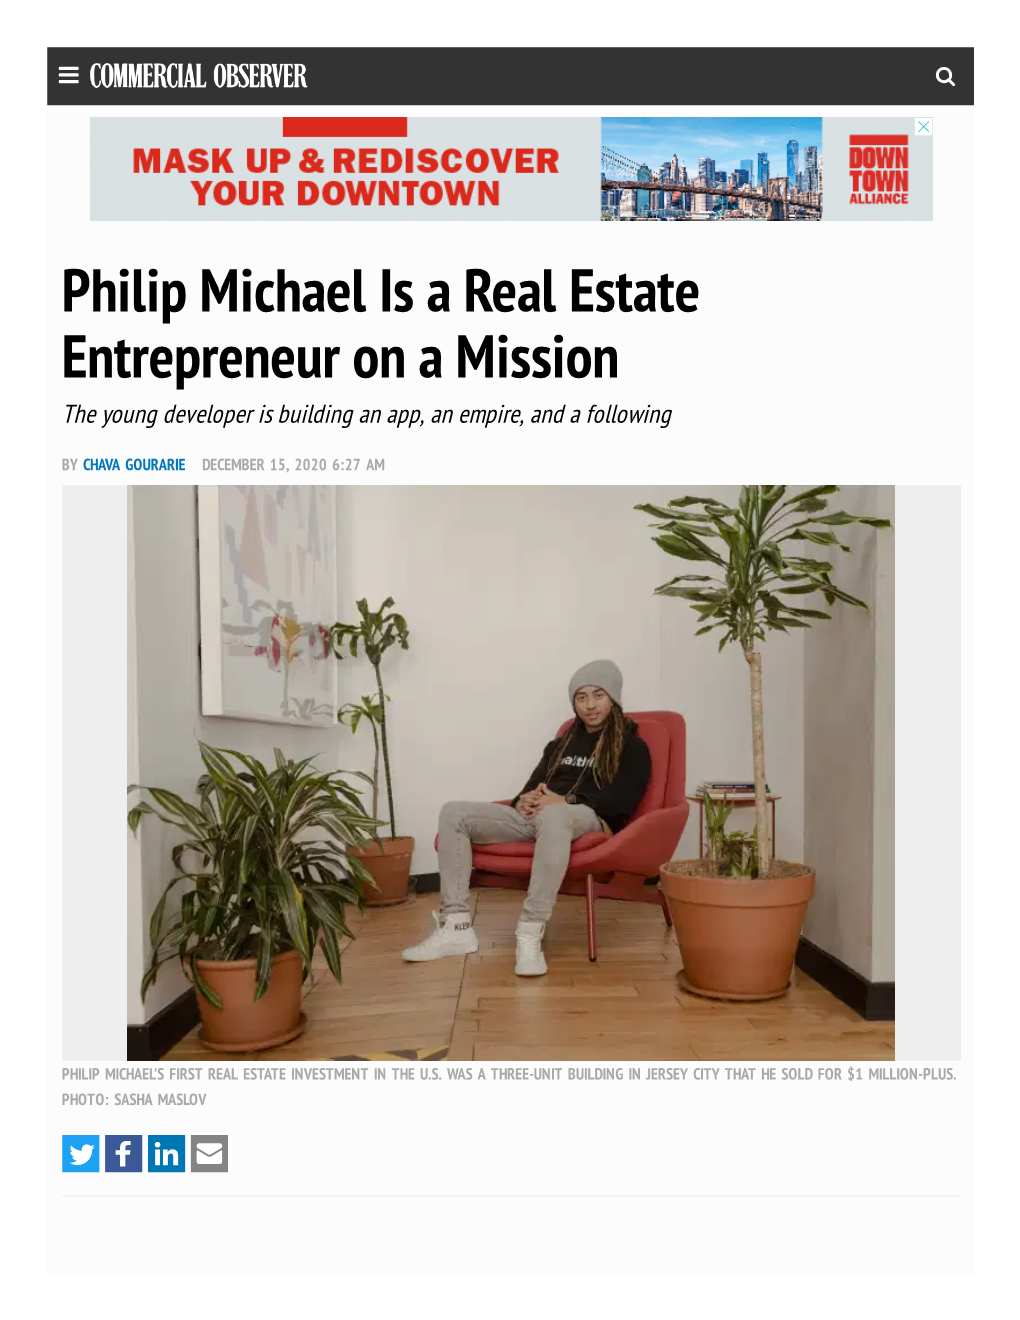 Philip Michael Is a Real Estate Entrepreneur on a Mission the Young Developer Is Building an App, an Empire, and a Following